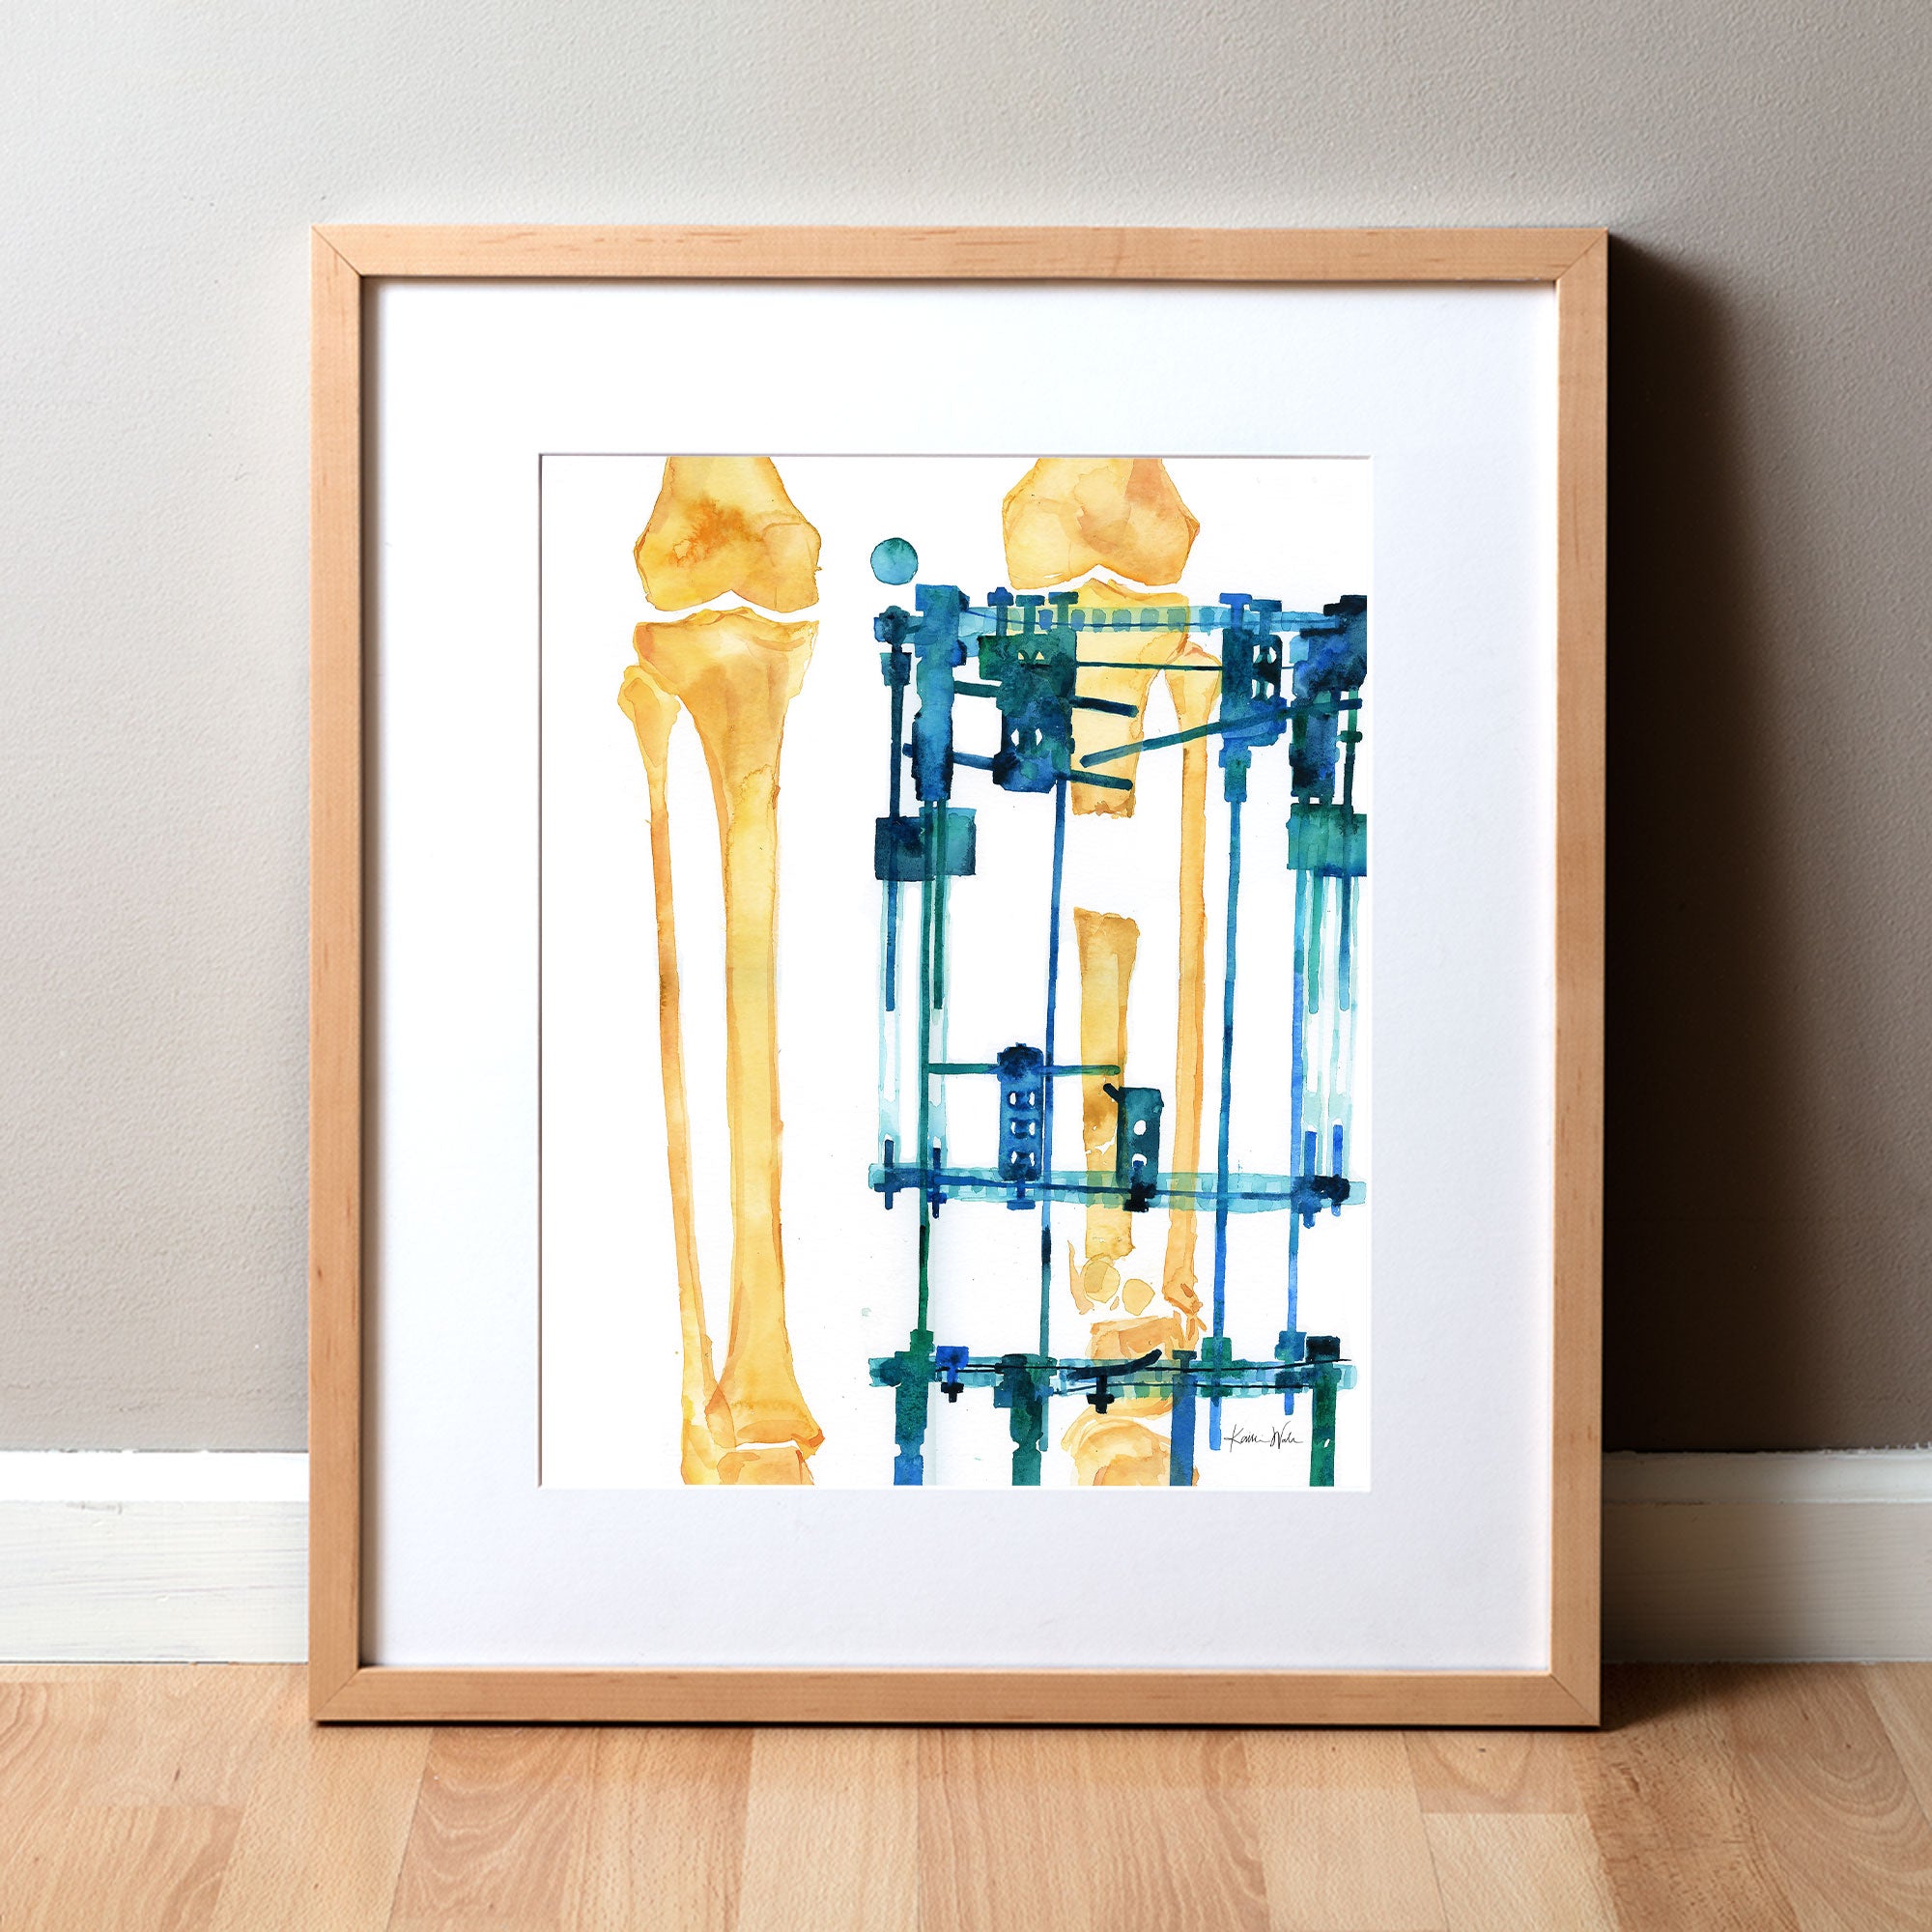 Framed watercolor painting of a post orthopedic surgery x-ray.